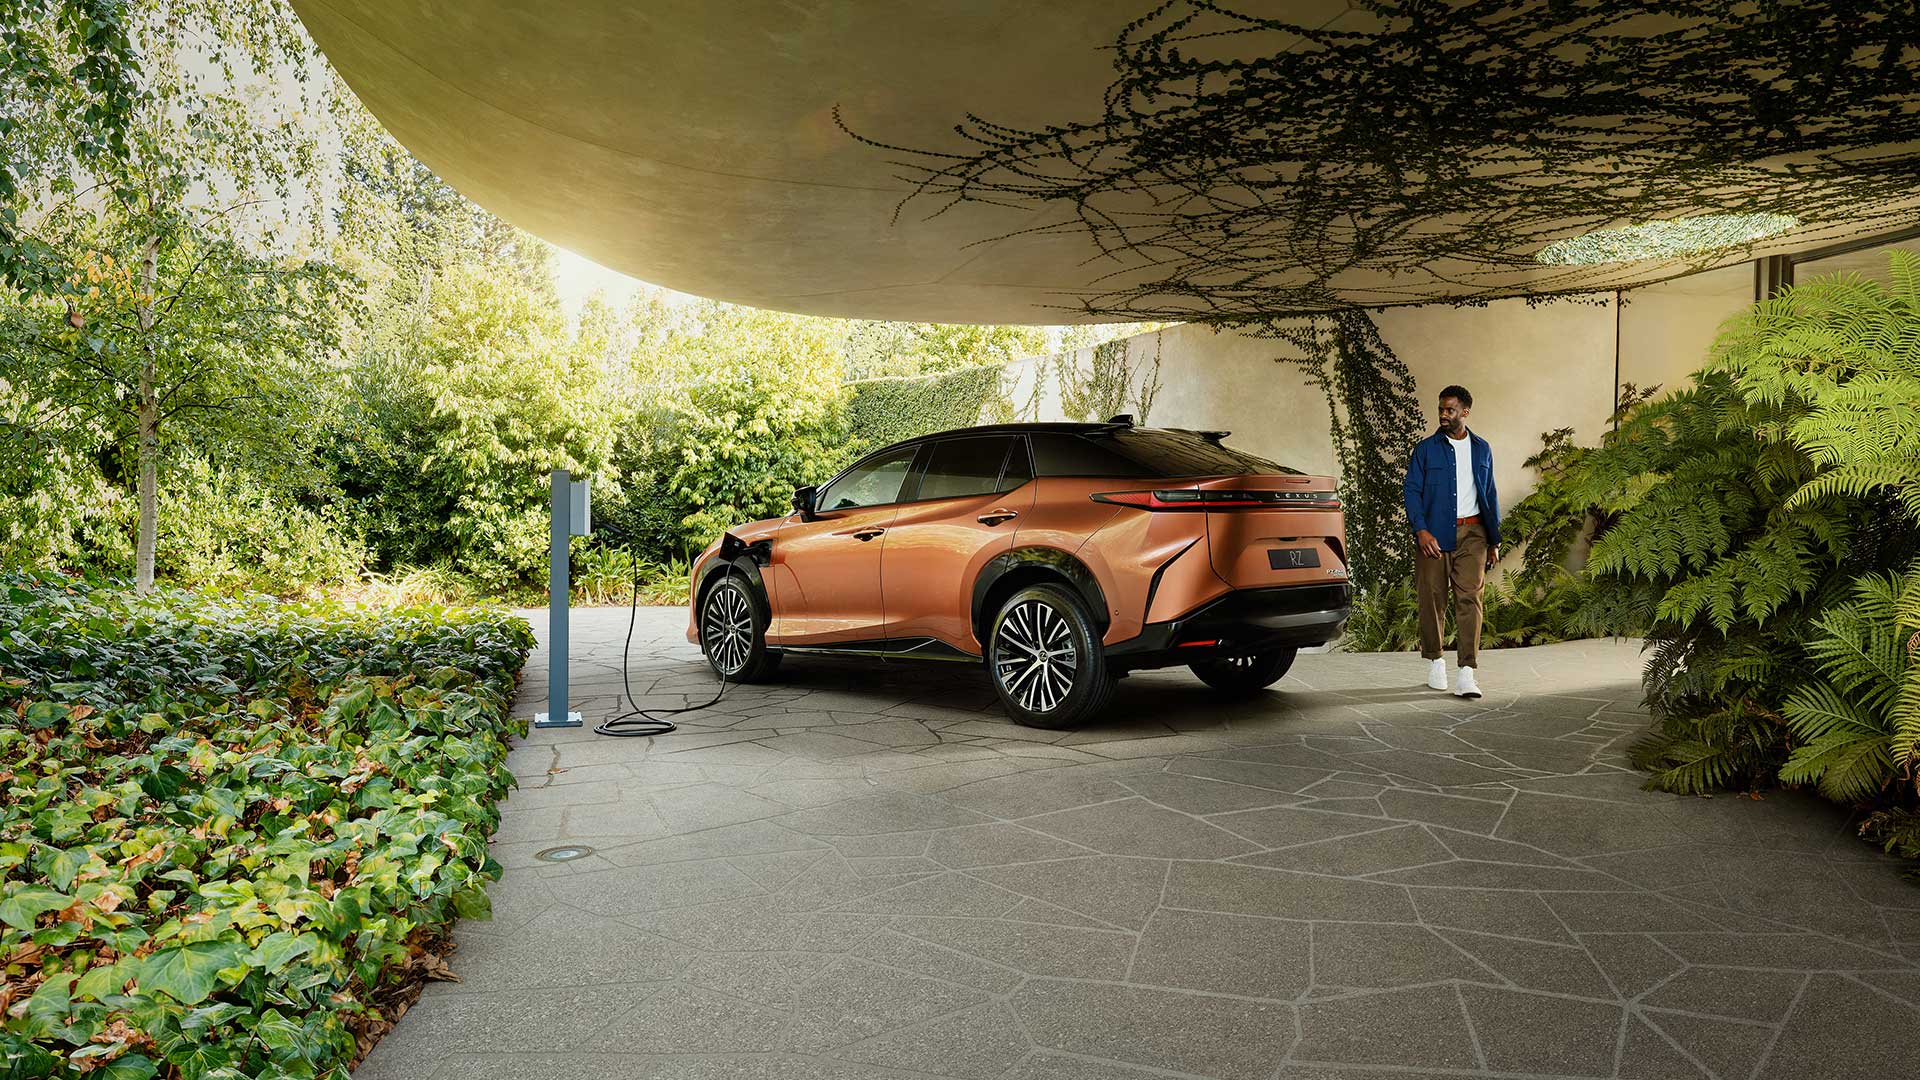 An copper Lexus RZ is parked and charging in a leafy green, vine-filled driveway. A man is seen walking around the rear of the car.